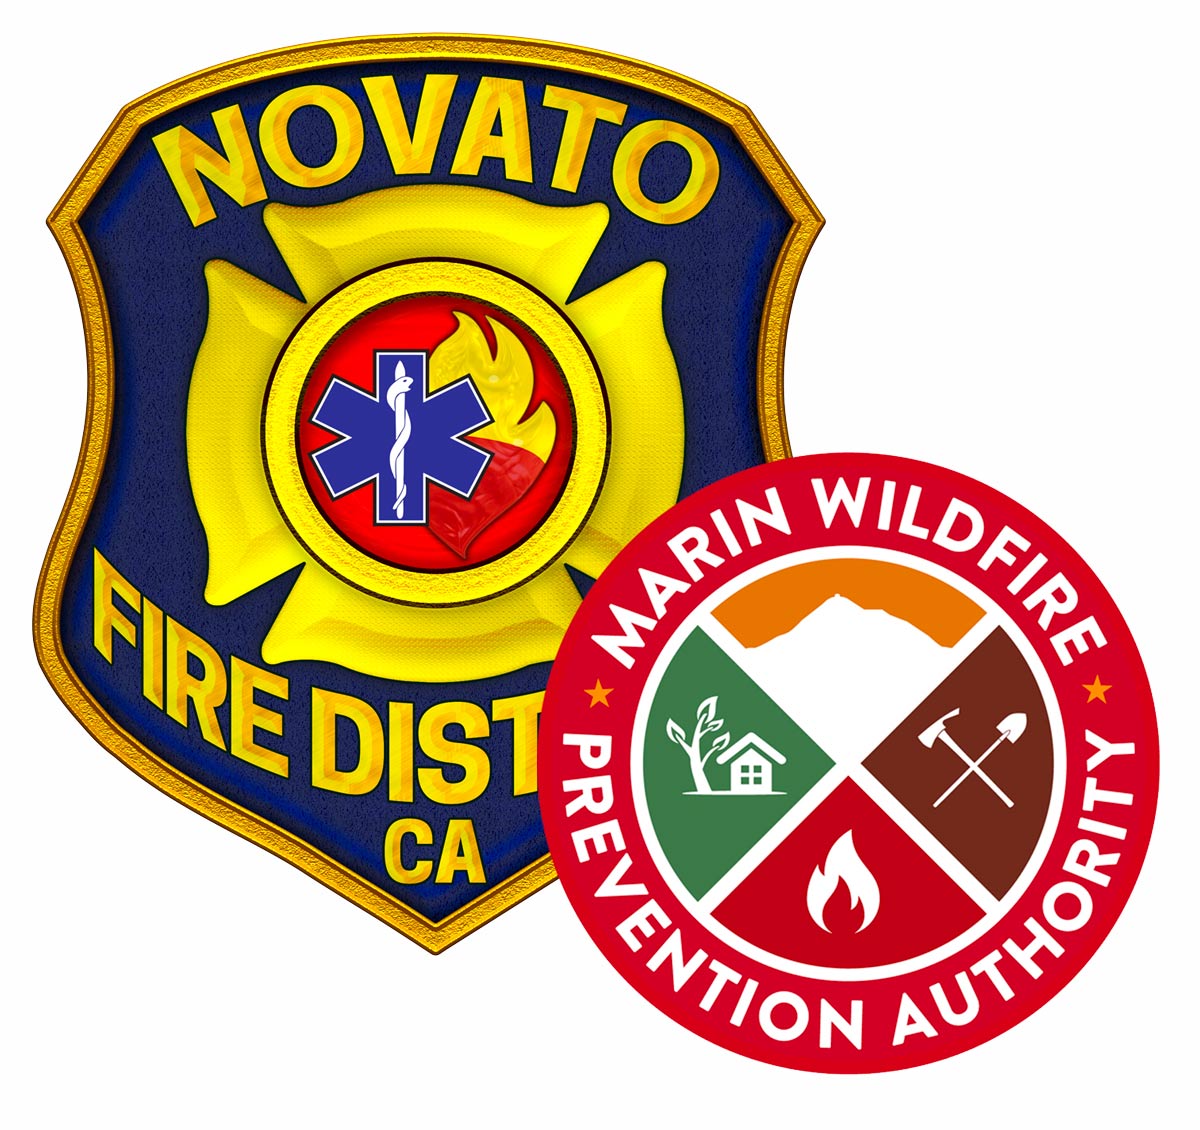 Novato Fire District and Marin Wildfire Protection